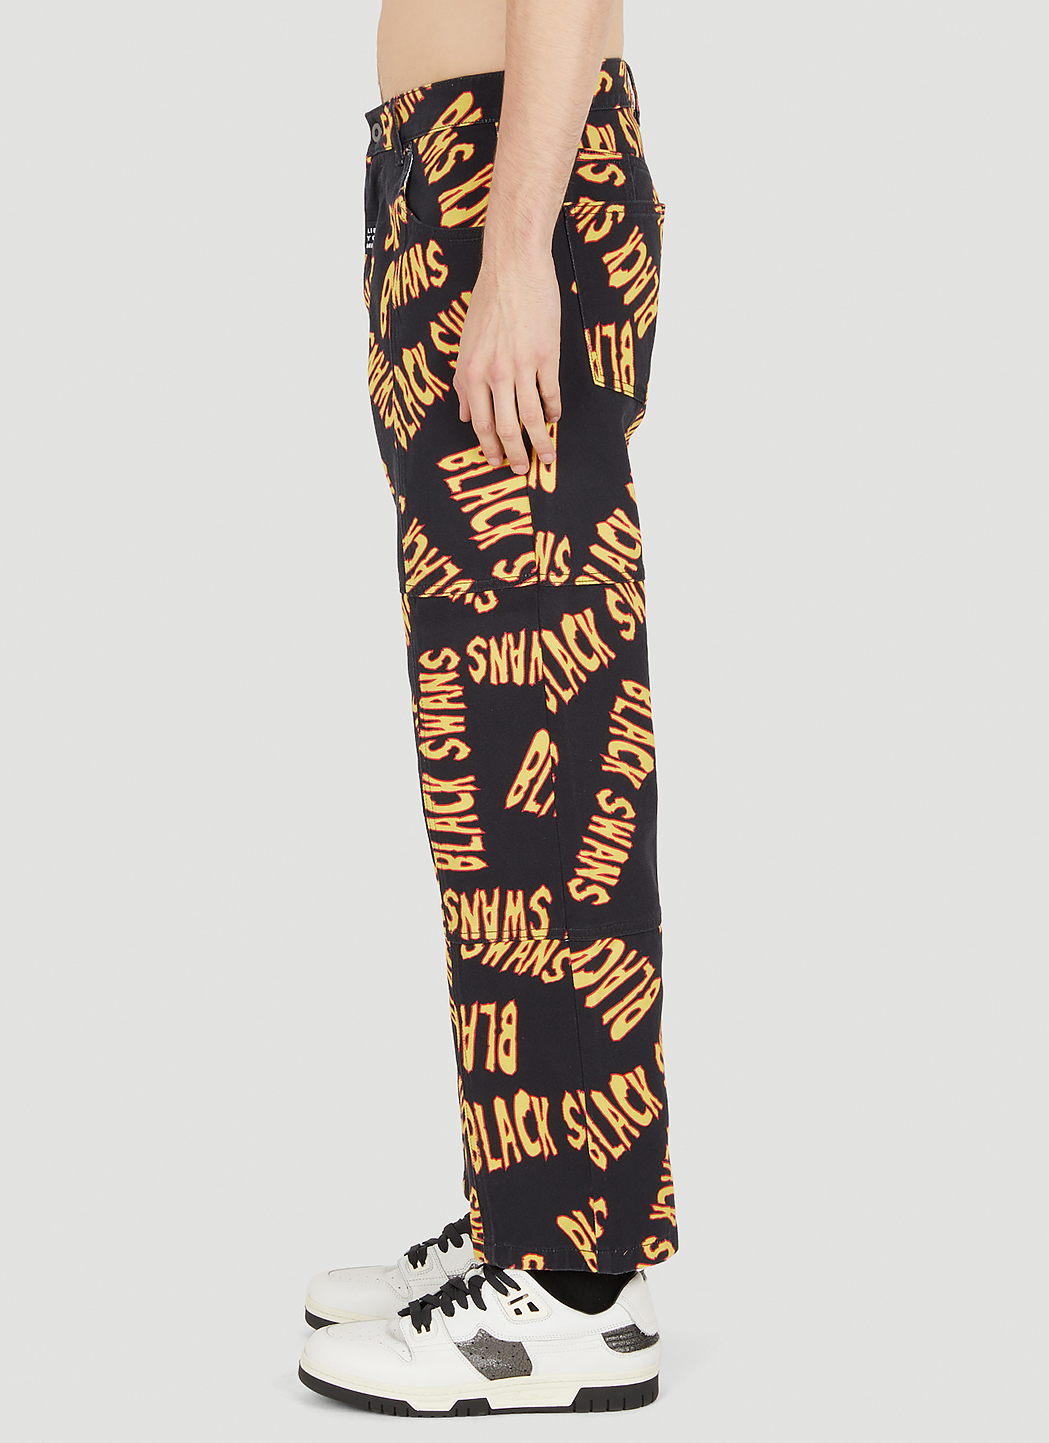 Liberal Youth Ministry Black Swans Panelled Pants